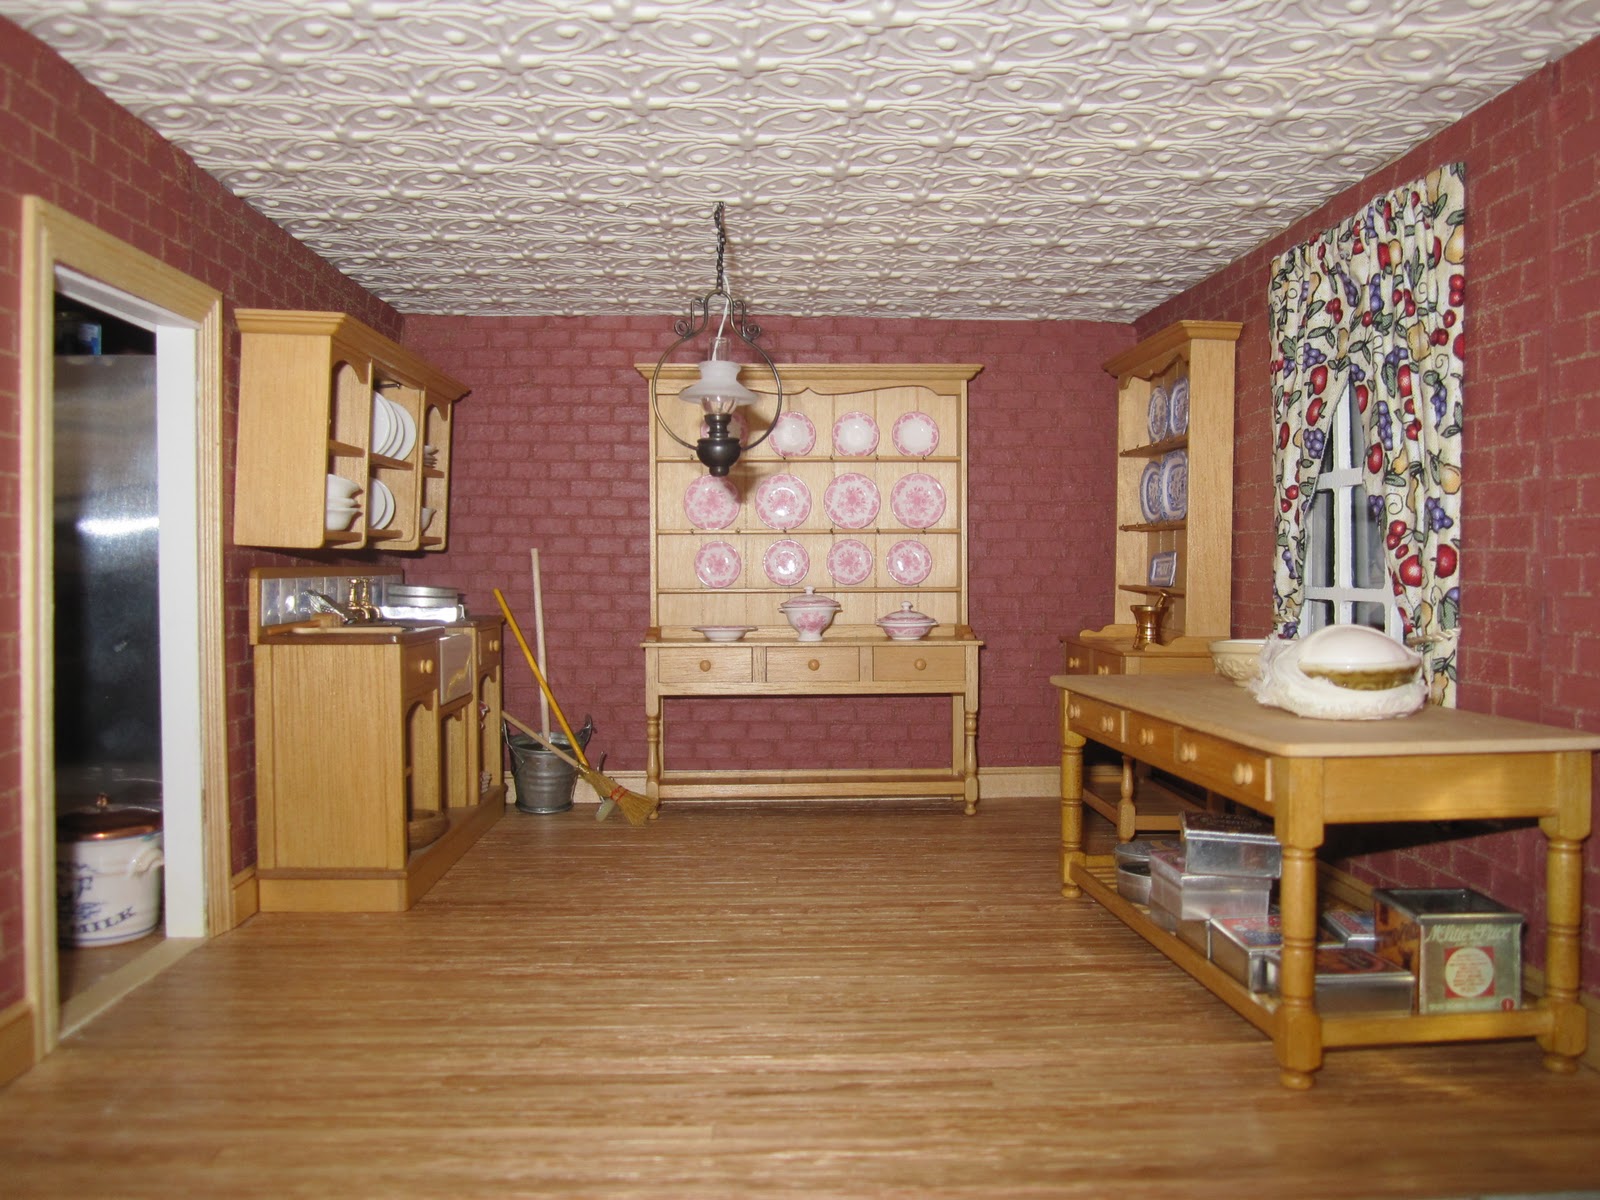 49+ Miniature Dollhouse Kitchen Wallpaper Country on ...